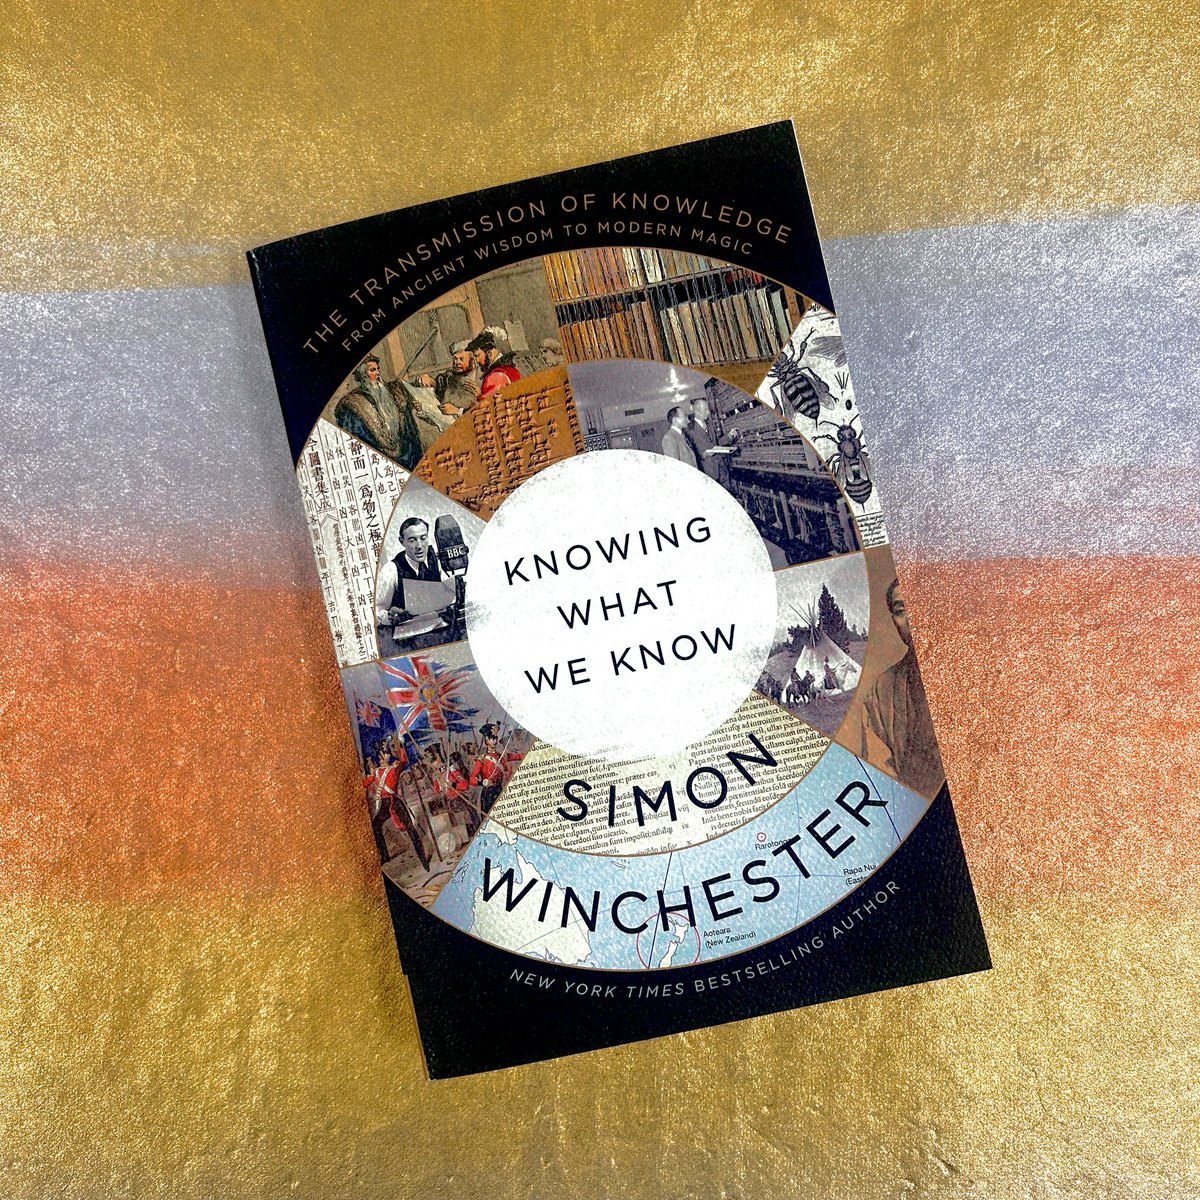 NOW IN PAPERBACK! From the ancient libraries to the digital age, Simon Winchester’s exploration of human intellect and technology’s impact on society is going to blow your mind.